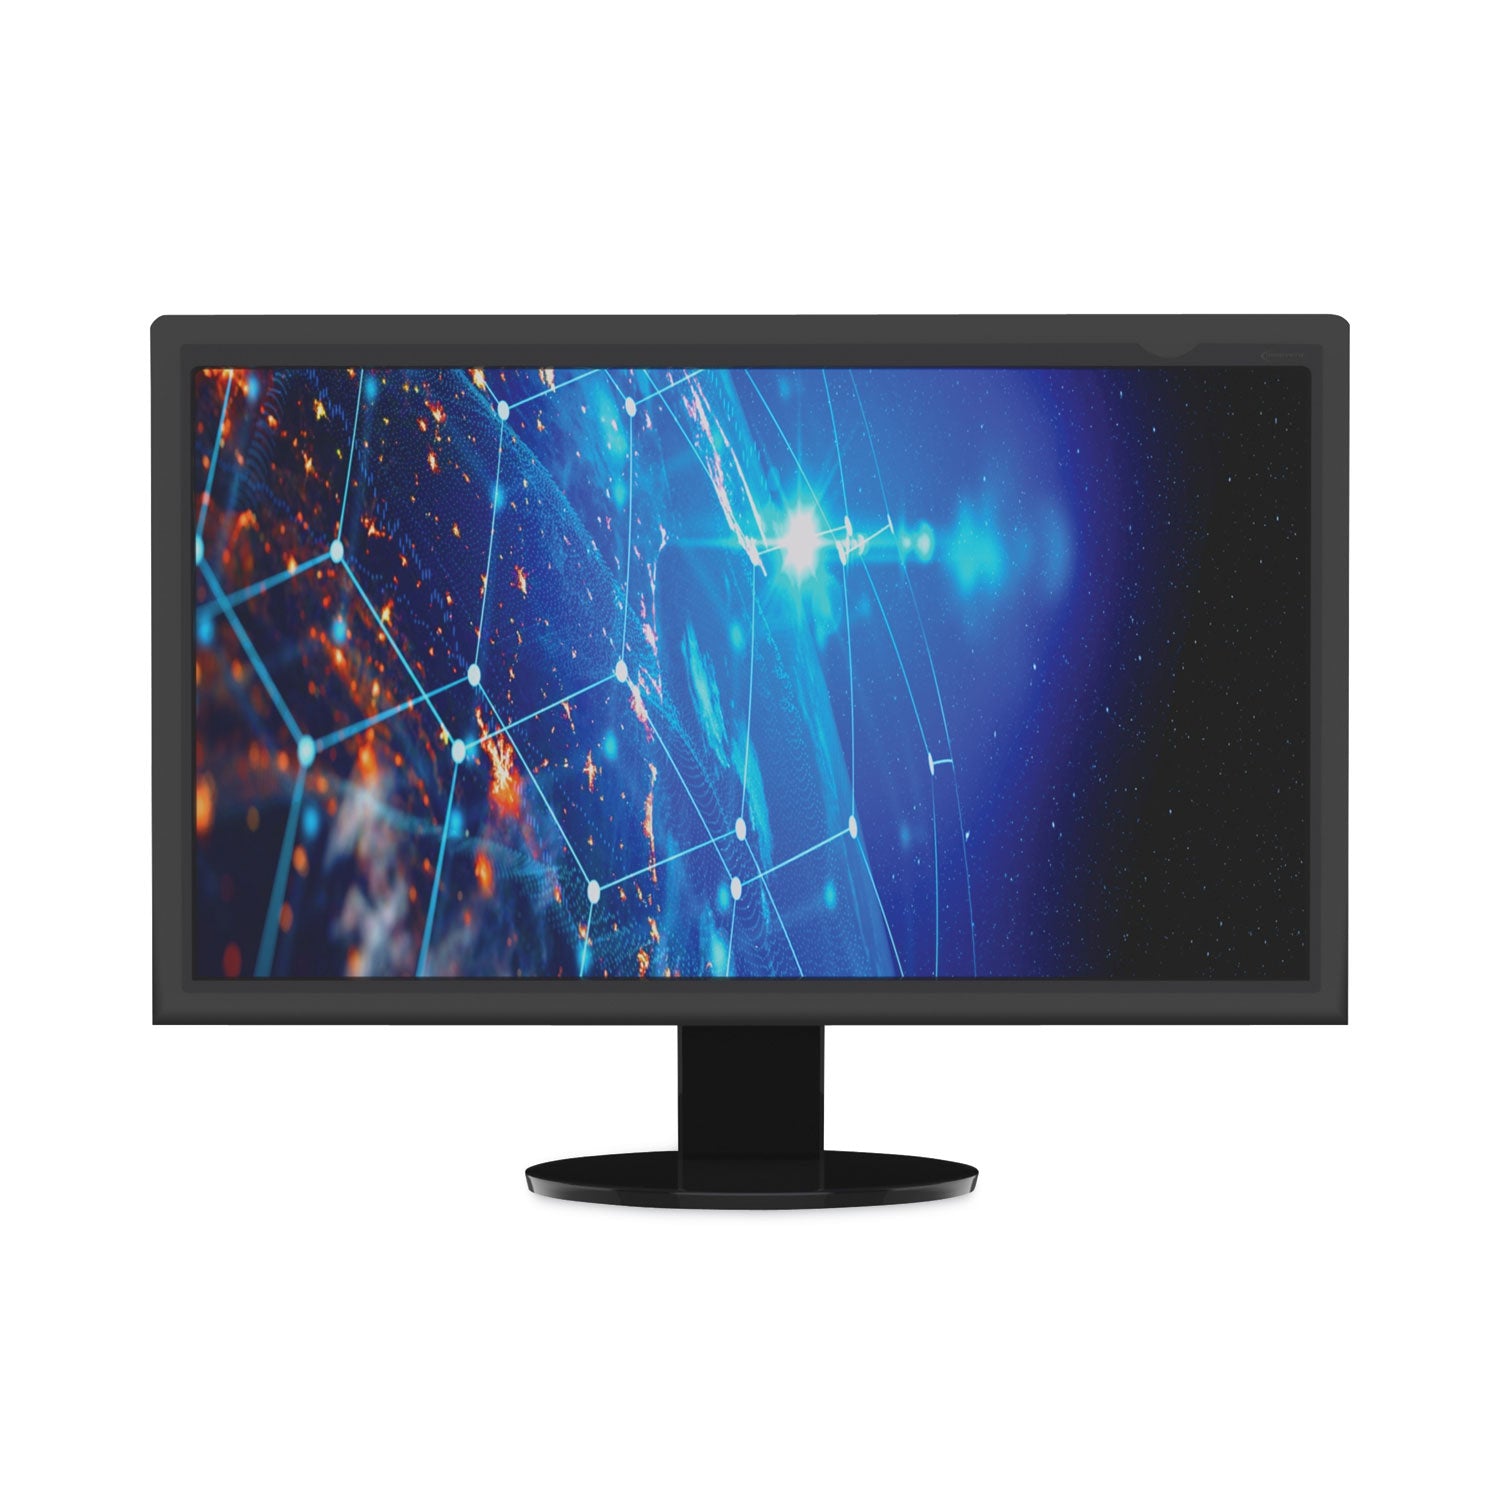 blackout-privacy-monitor-filter-for-236-widescreen-flat-panel-monitor-169-aspect-ratio_ivrblf236w - 4